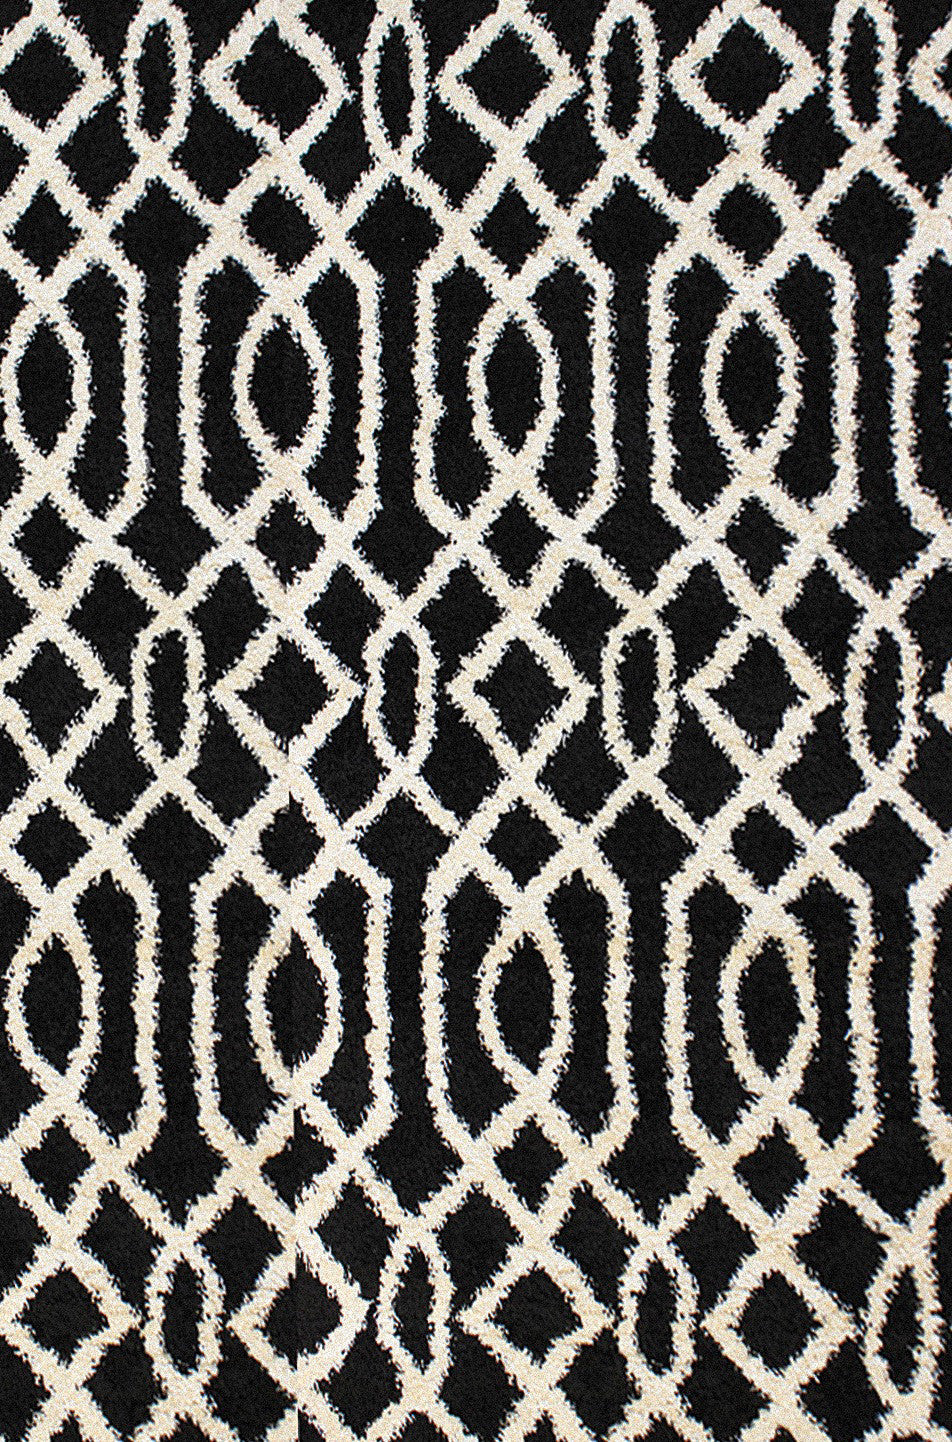 Dynamic Rugs Passion 6203 Black Area Rug main image